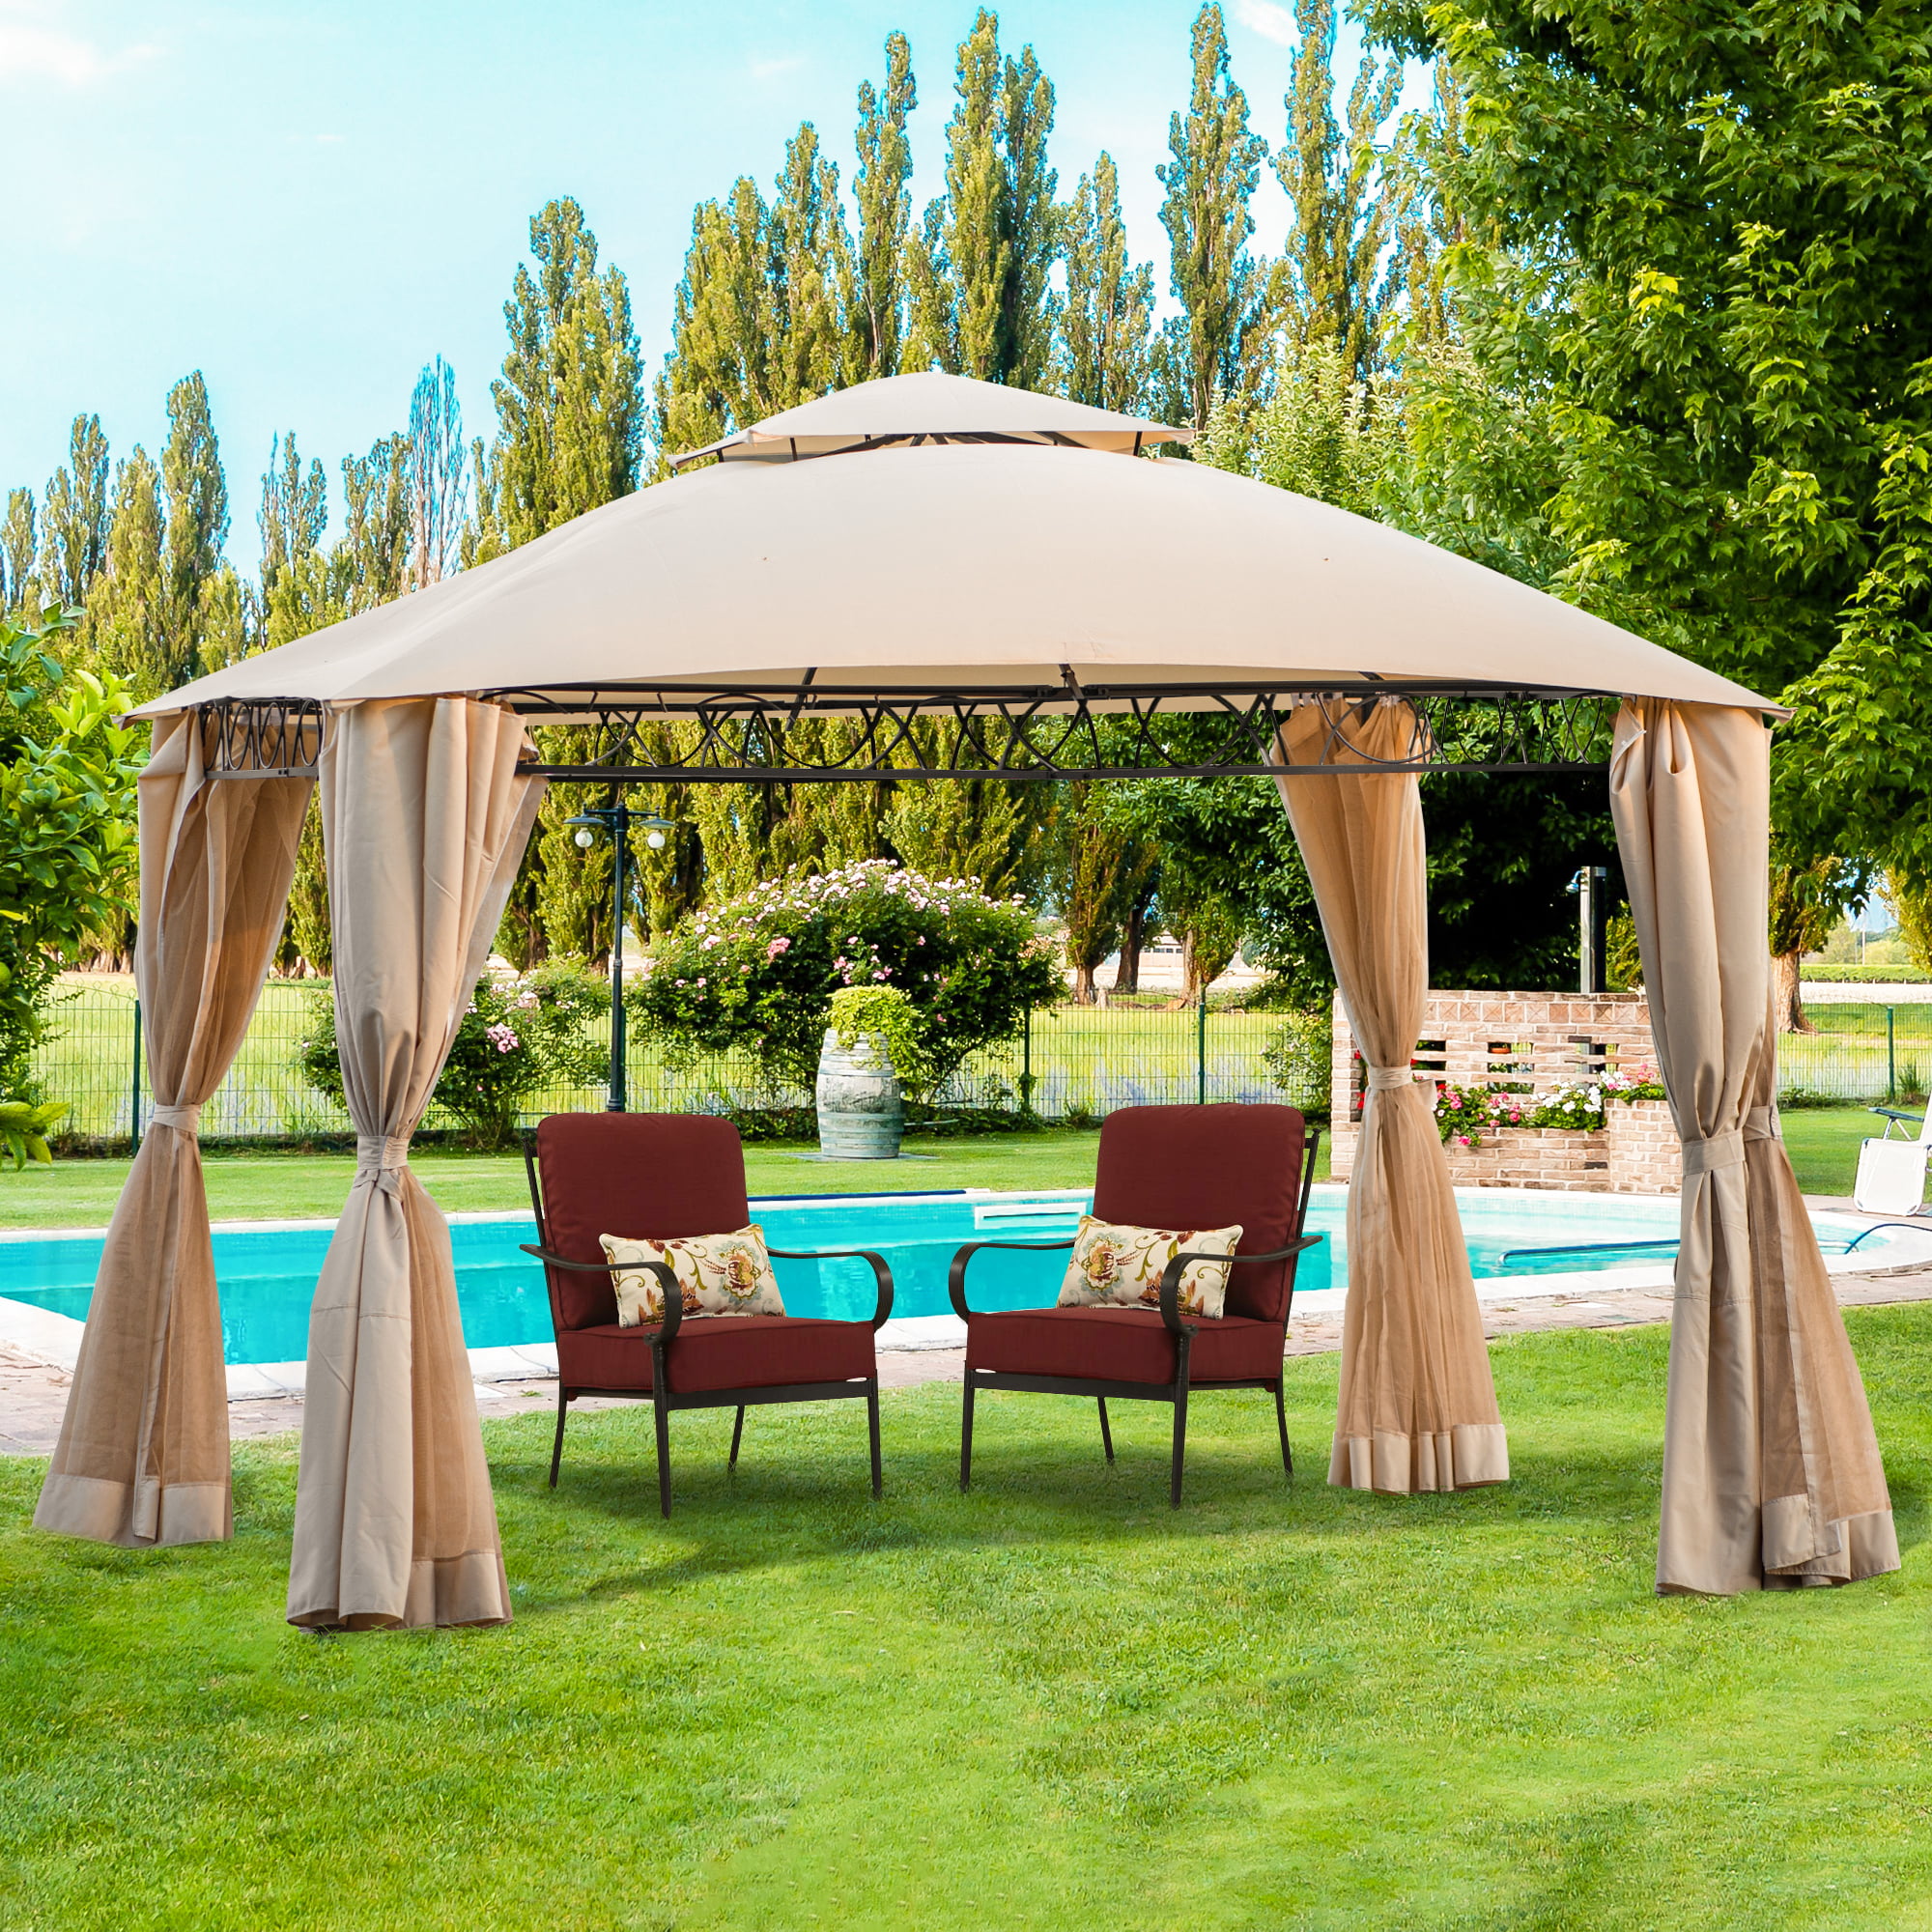 Outsunny 10x10ft Garden Gazebo Double Top Outdoor Canopy Patio Event Party Tent Backyard Sun Shade with Mesh Curtain Beige